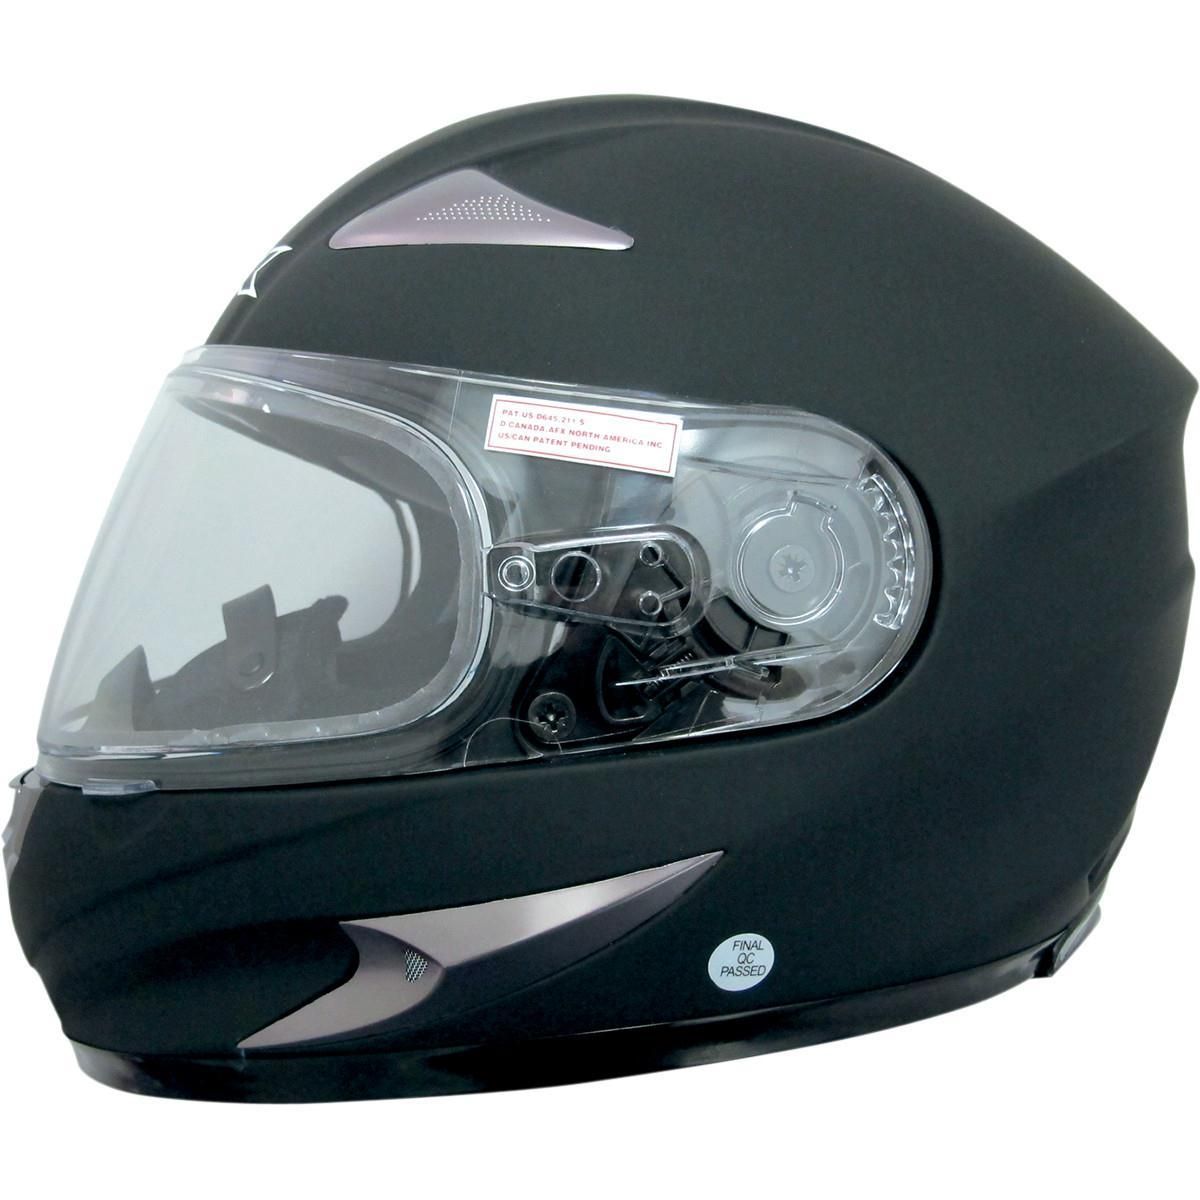 3L3-AFX-0121-0464 FX-90S Snow Solid Helmet with Dual Lens Shield